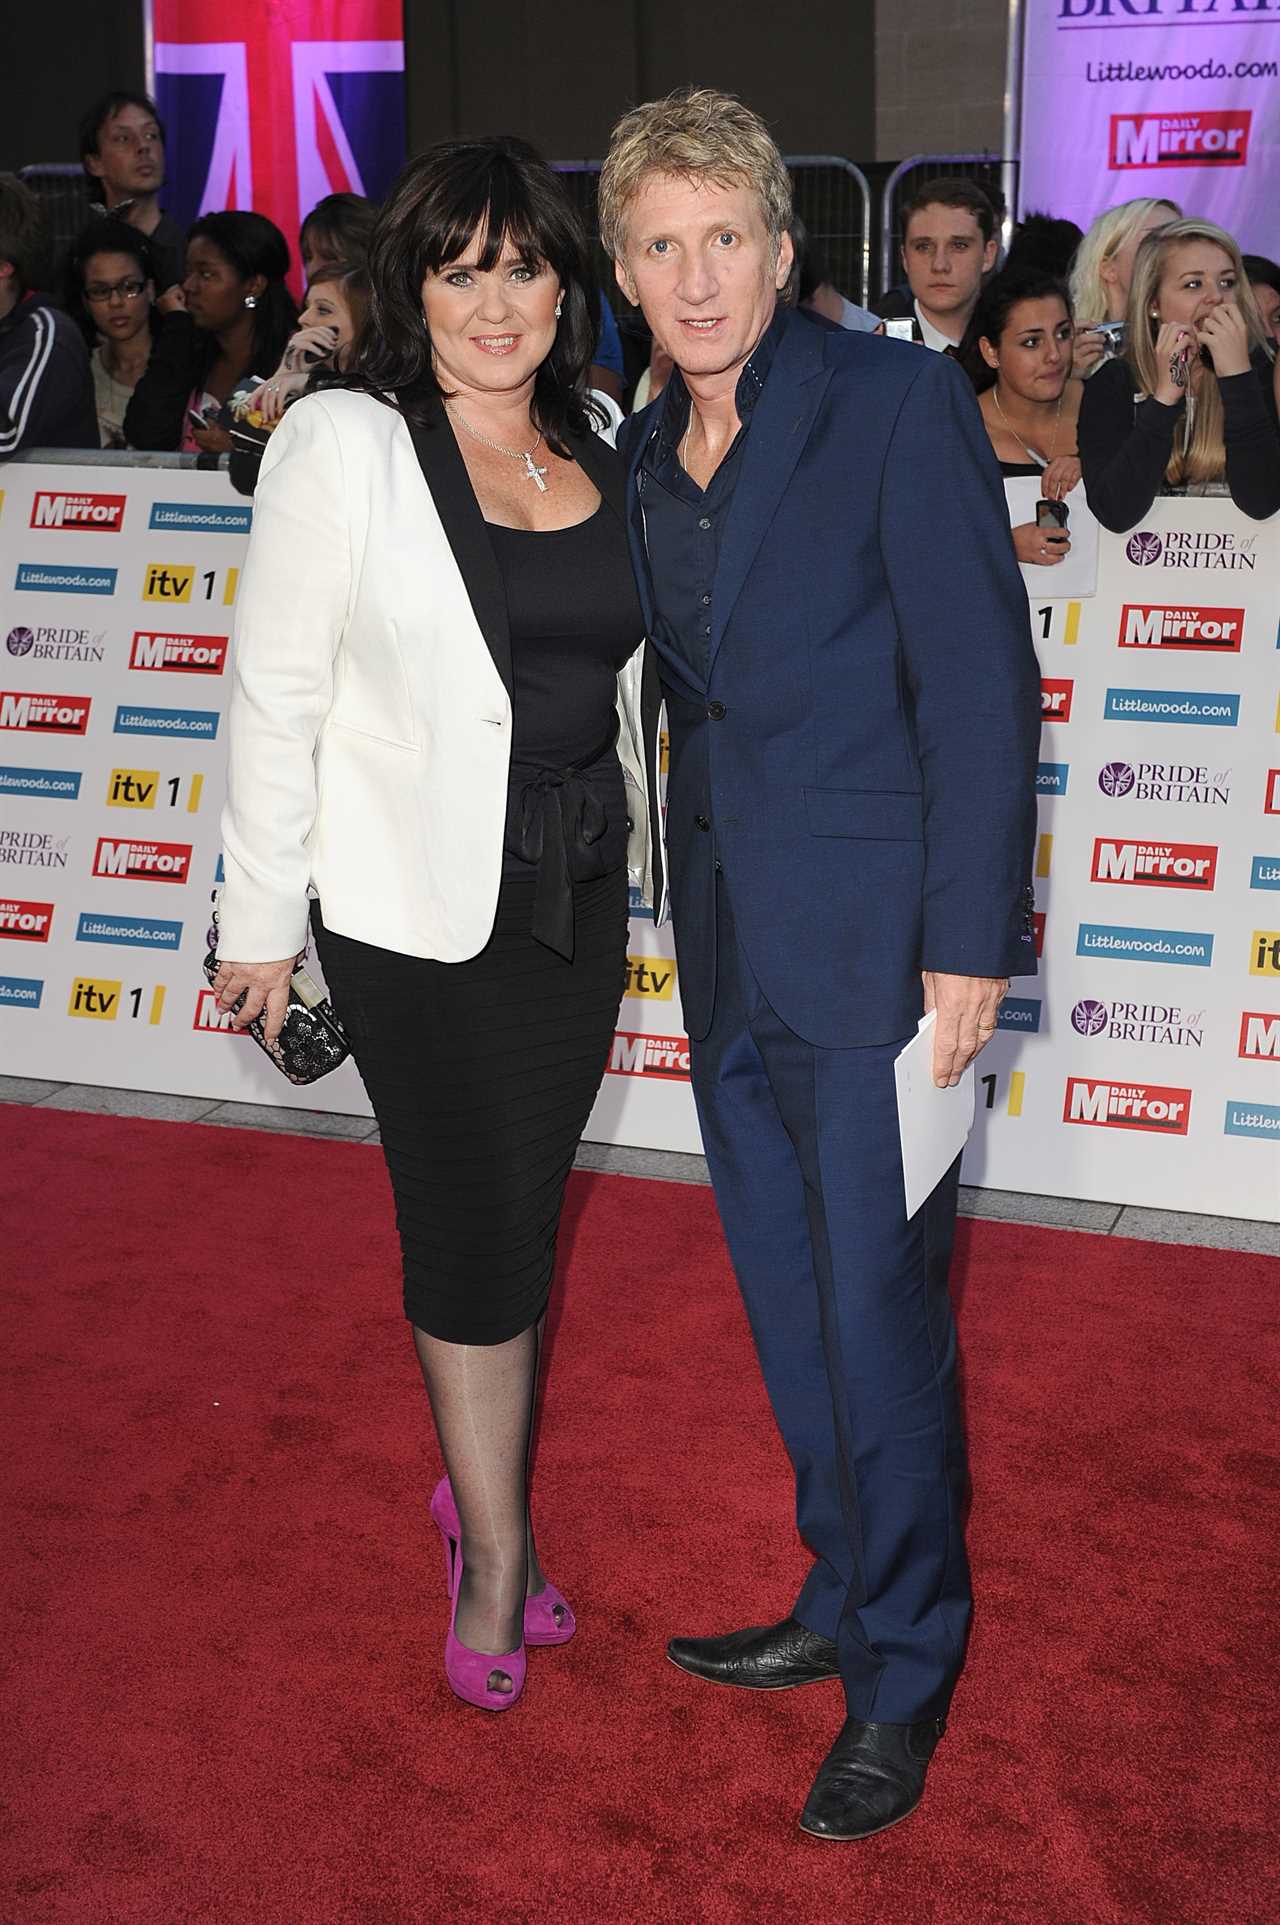 Coleen Nolan reveals fear of dying from cancer made her divorce husband Ray Fensome and says she now has a new ‘zest for life’